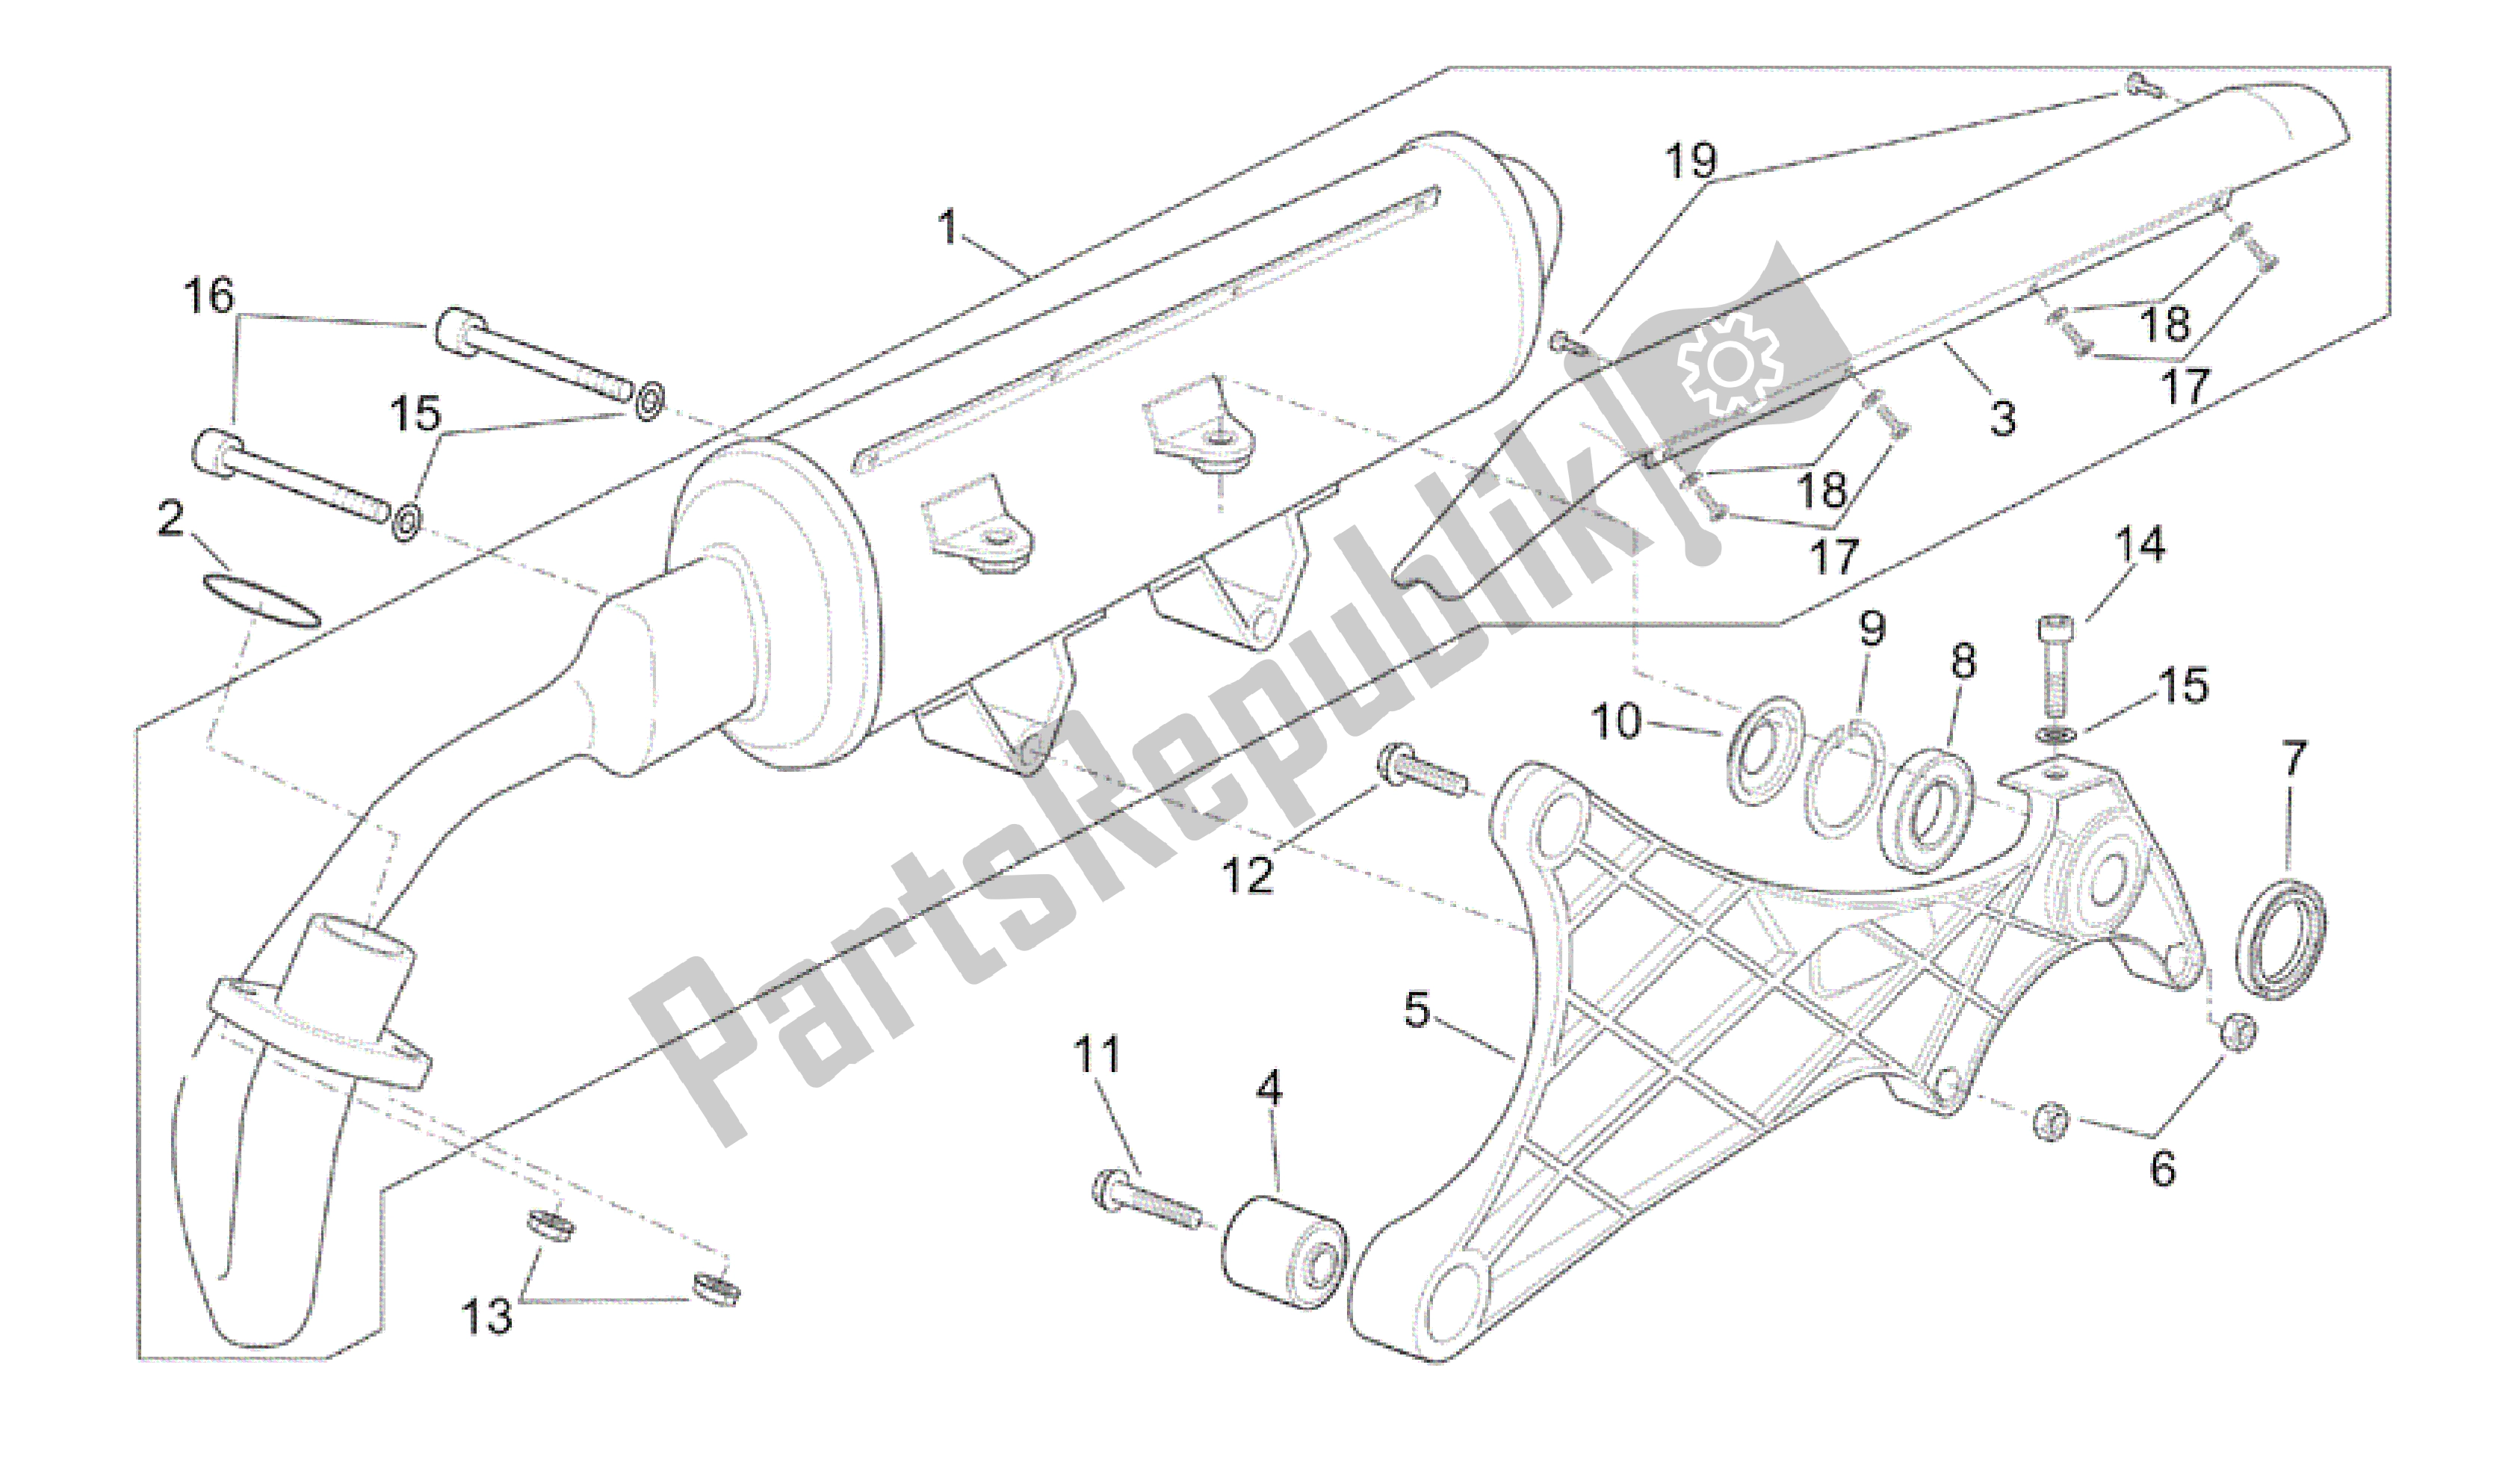 All parts for the Exhaust Unit of the Aprilia Scarabeo 200 1999 - 2004